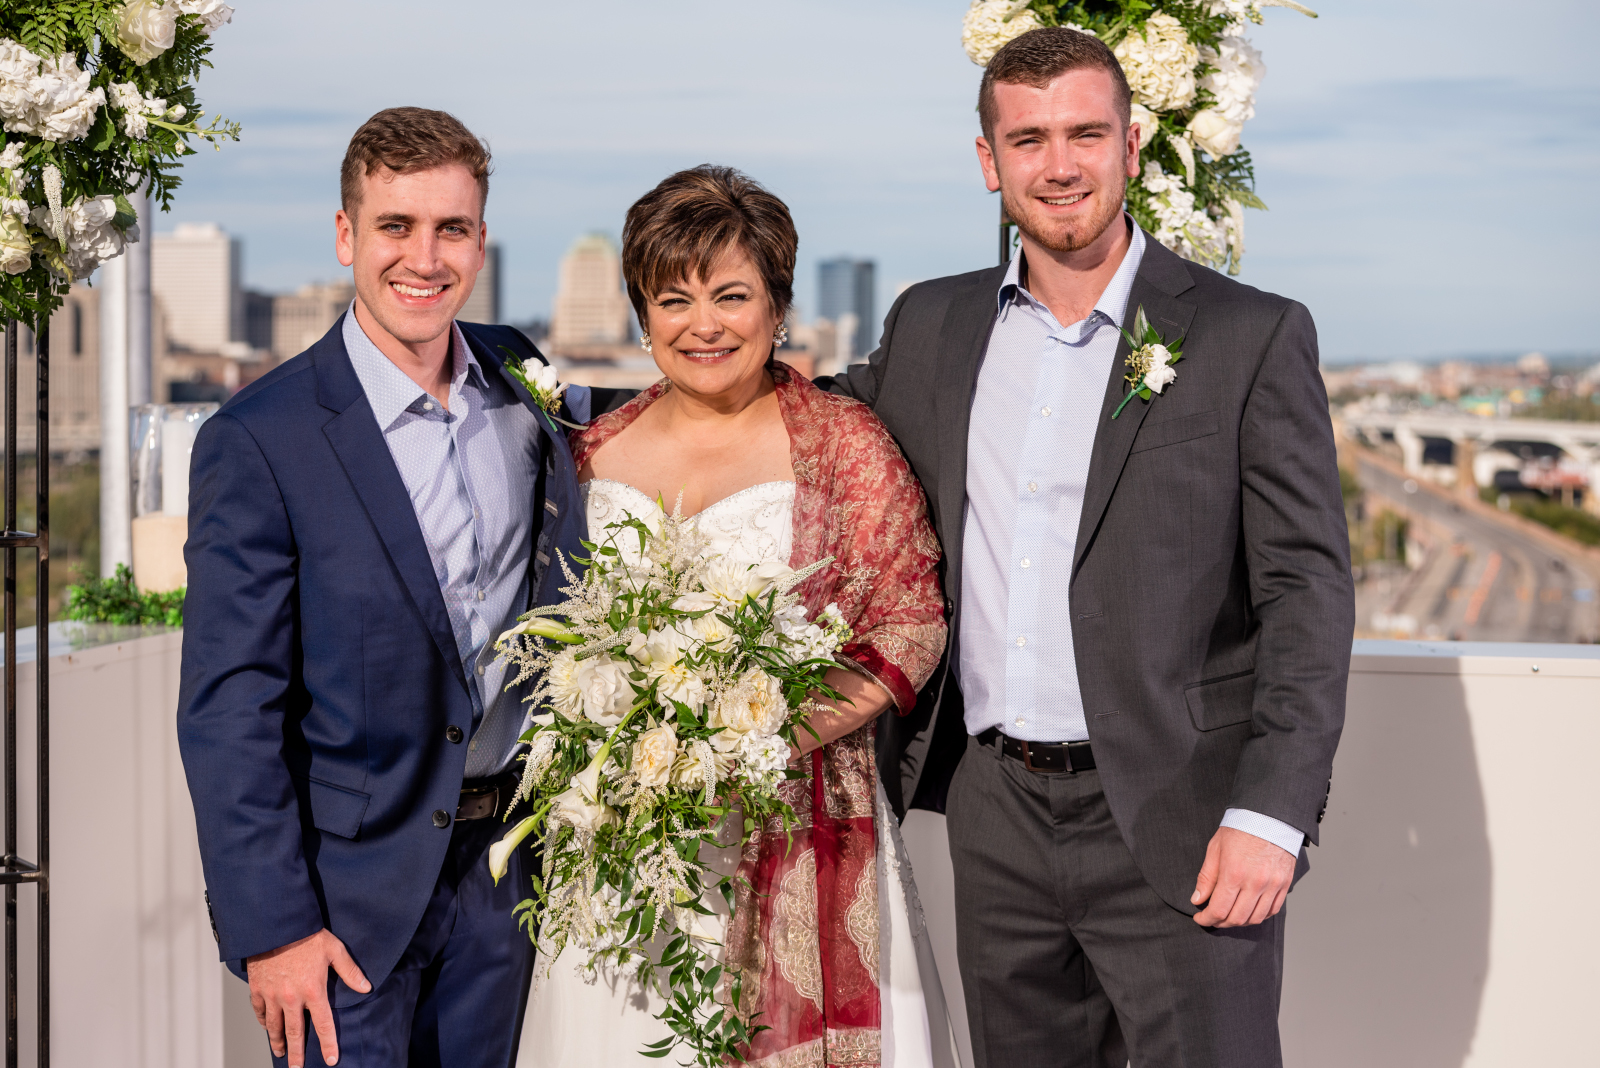 Bride with sons, groomsmen, small bridal party, bridal party portrait, older couple, romantic outdoor urban wedding ceremony at Penthouse Events, Ohio City, Cleveland Flats, downtown Cleveland skyline